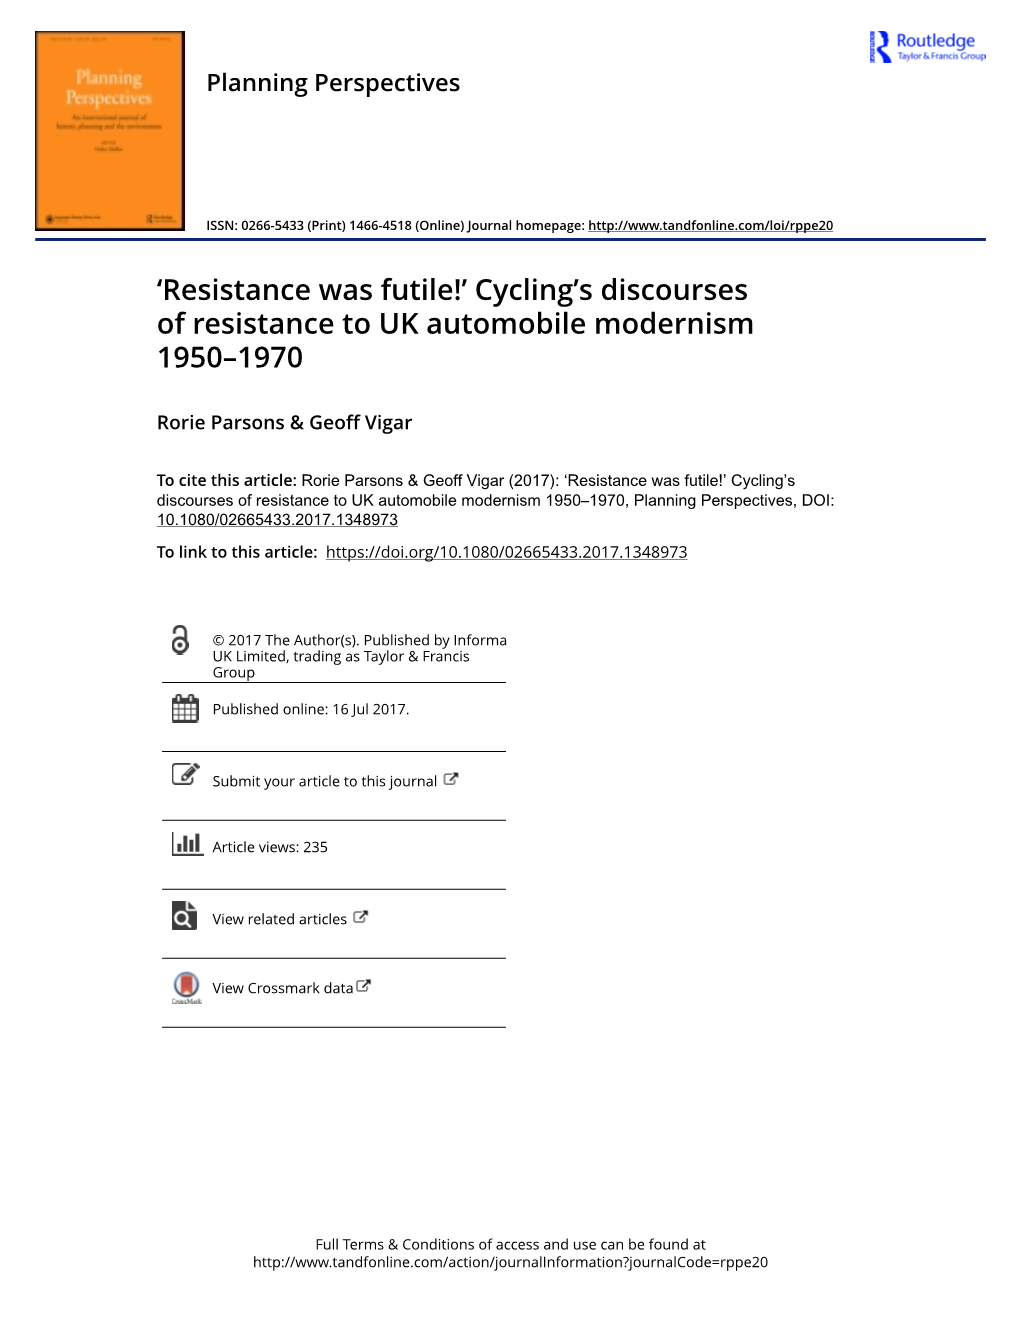 Cyclings Discourses of Resistance to UK Automobile Modernism 19501970